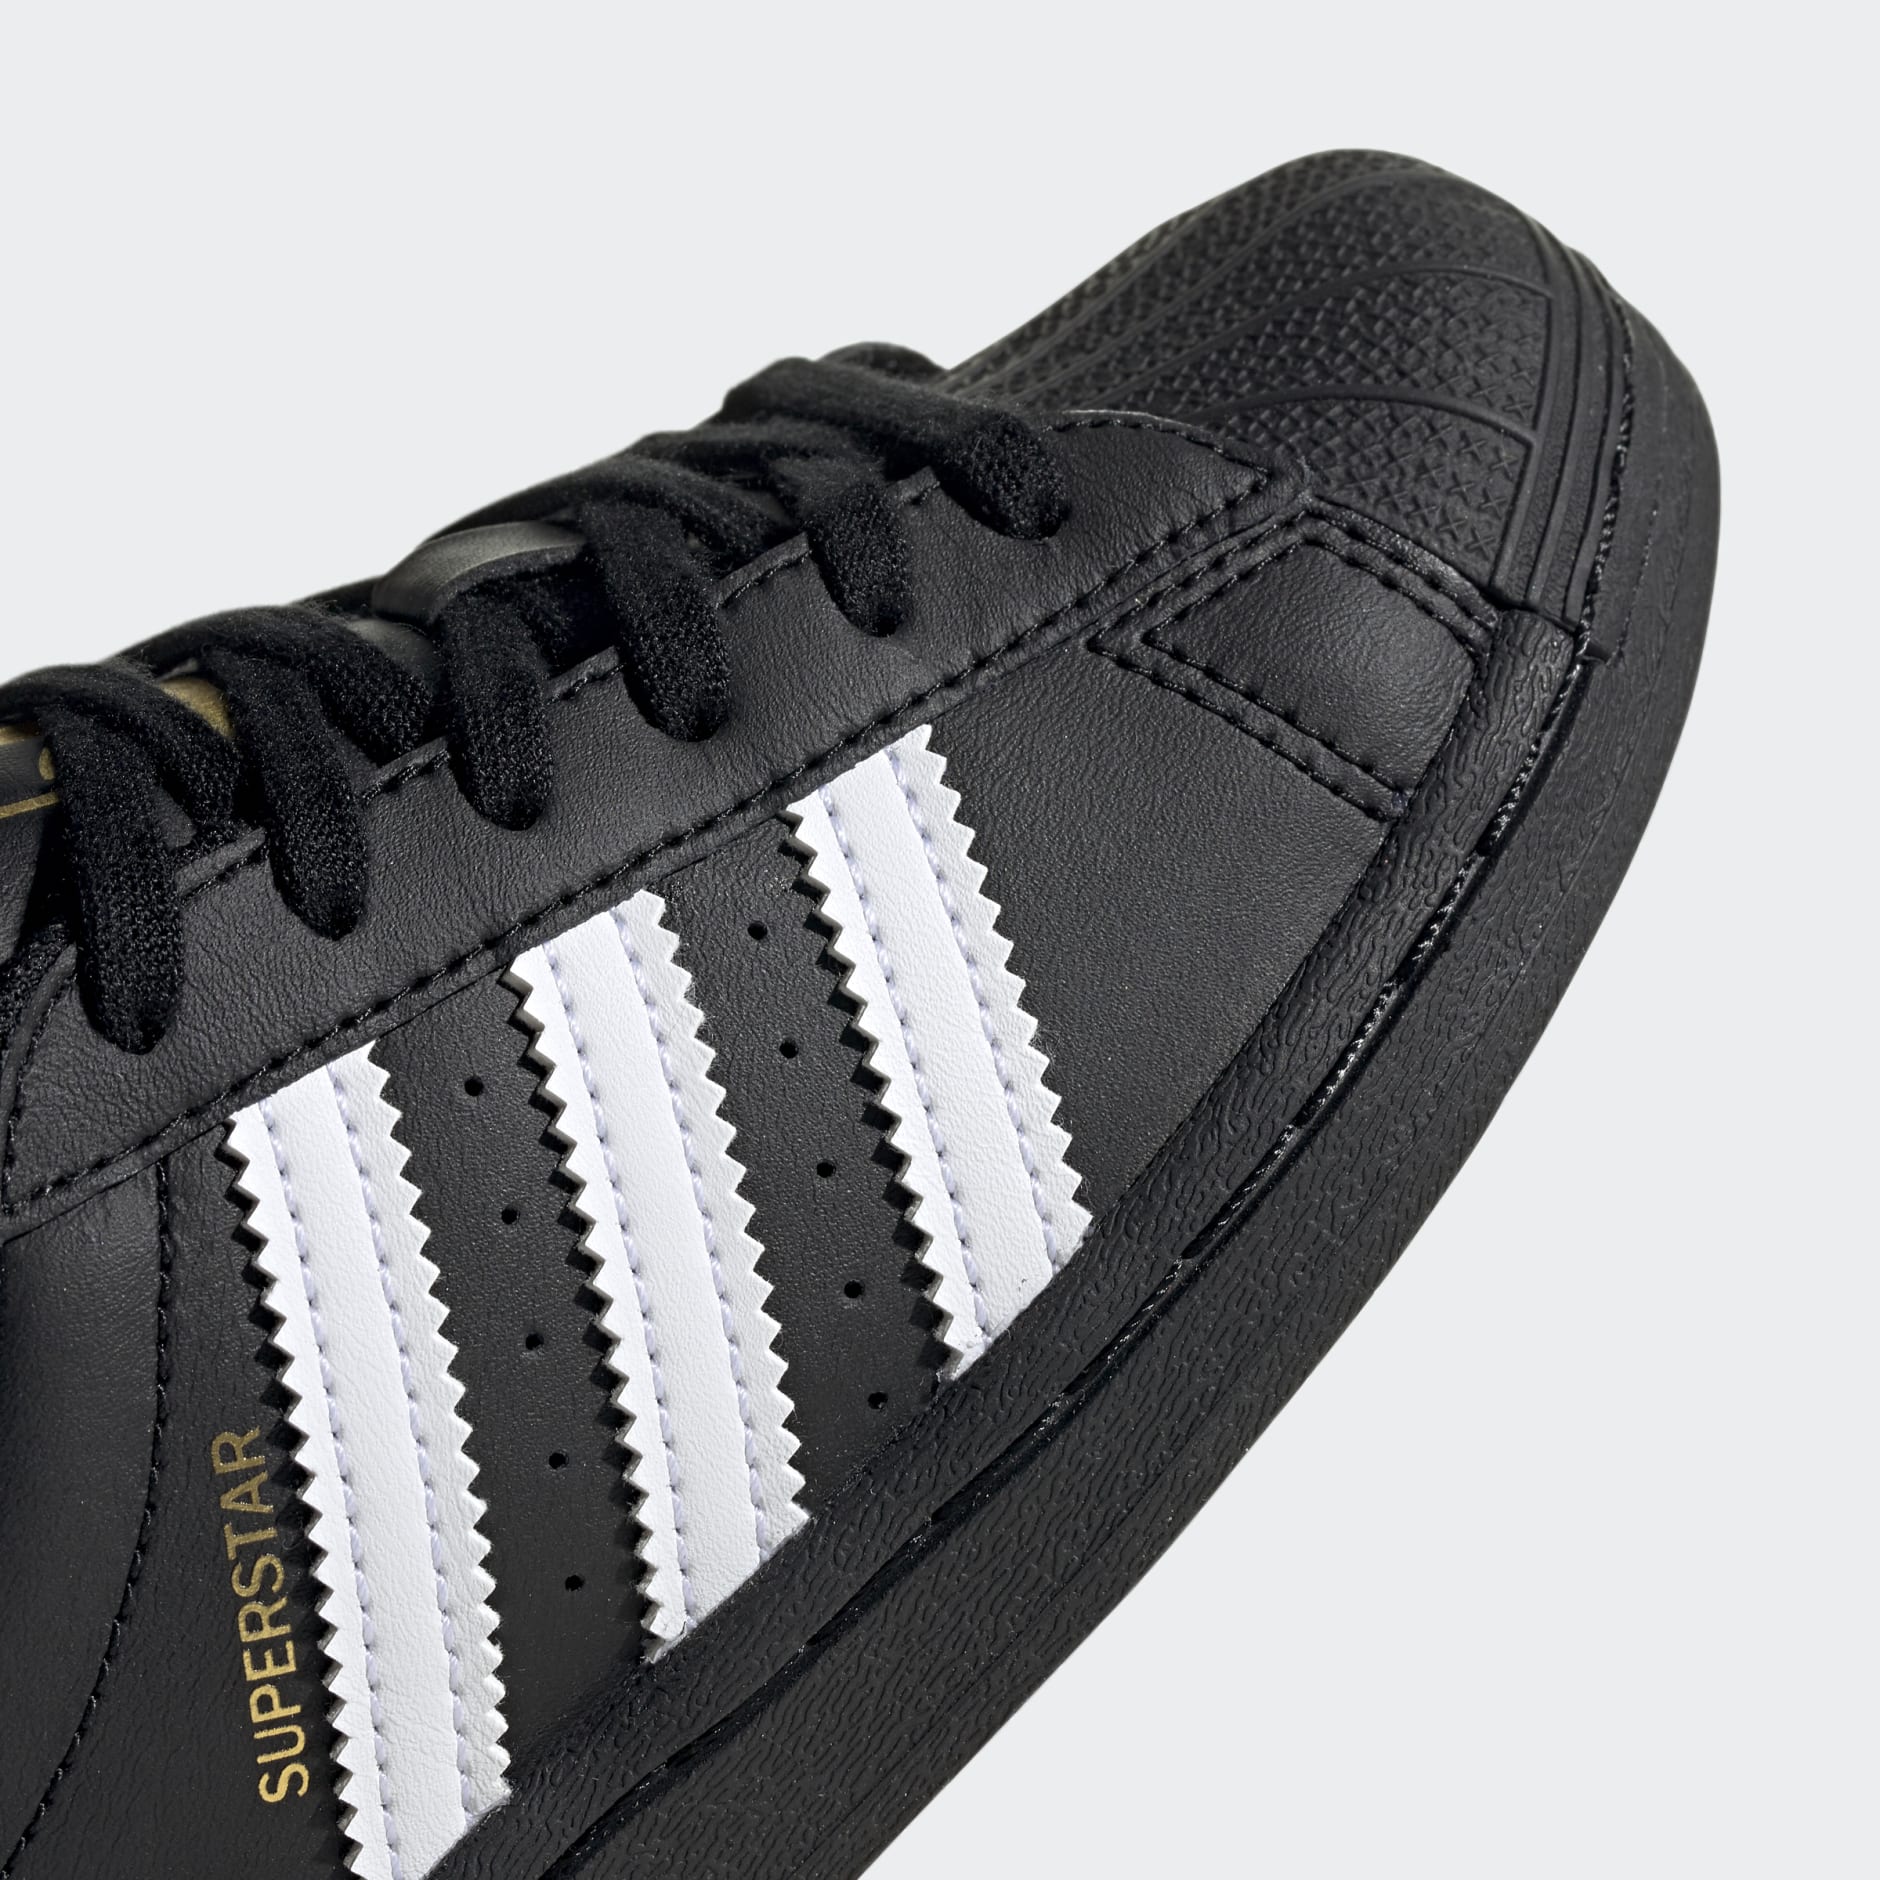 Shoes - Superstar Shoes - Black | adidas South Africa